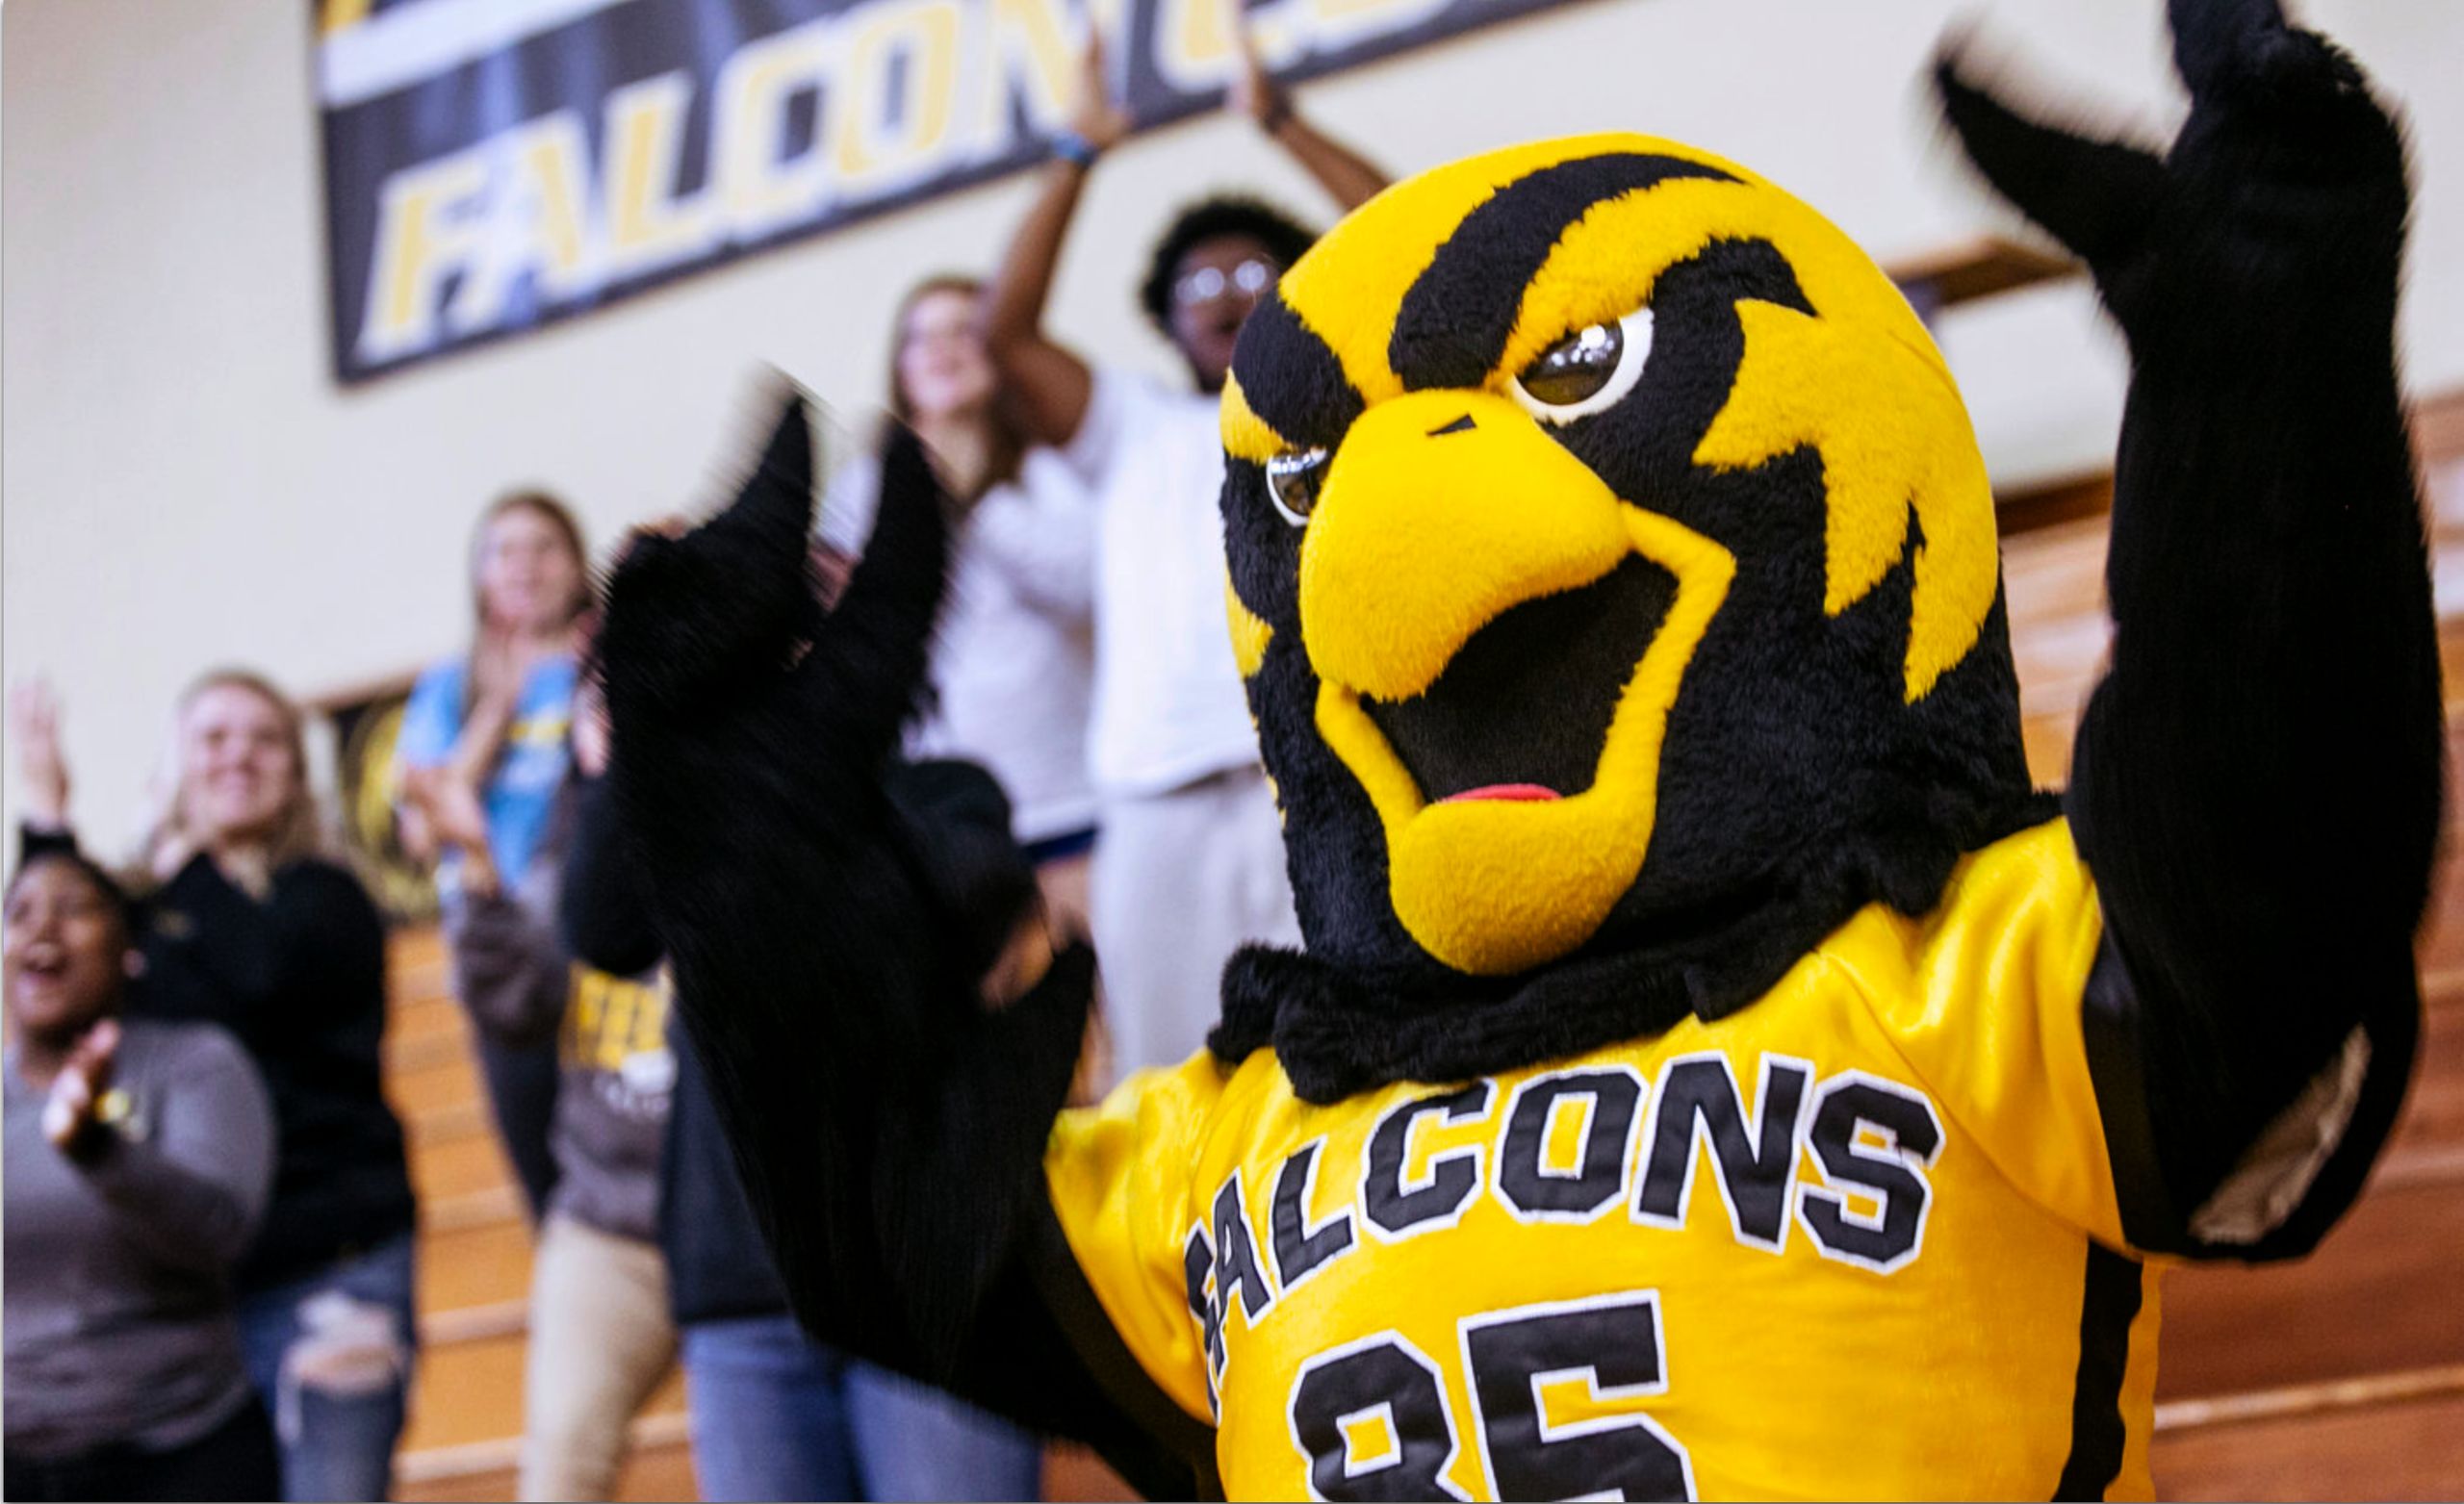 Pfeiffer mascot at athletic event